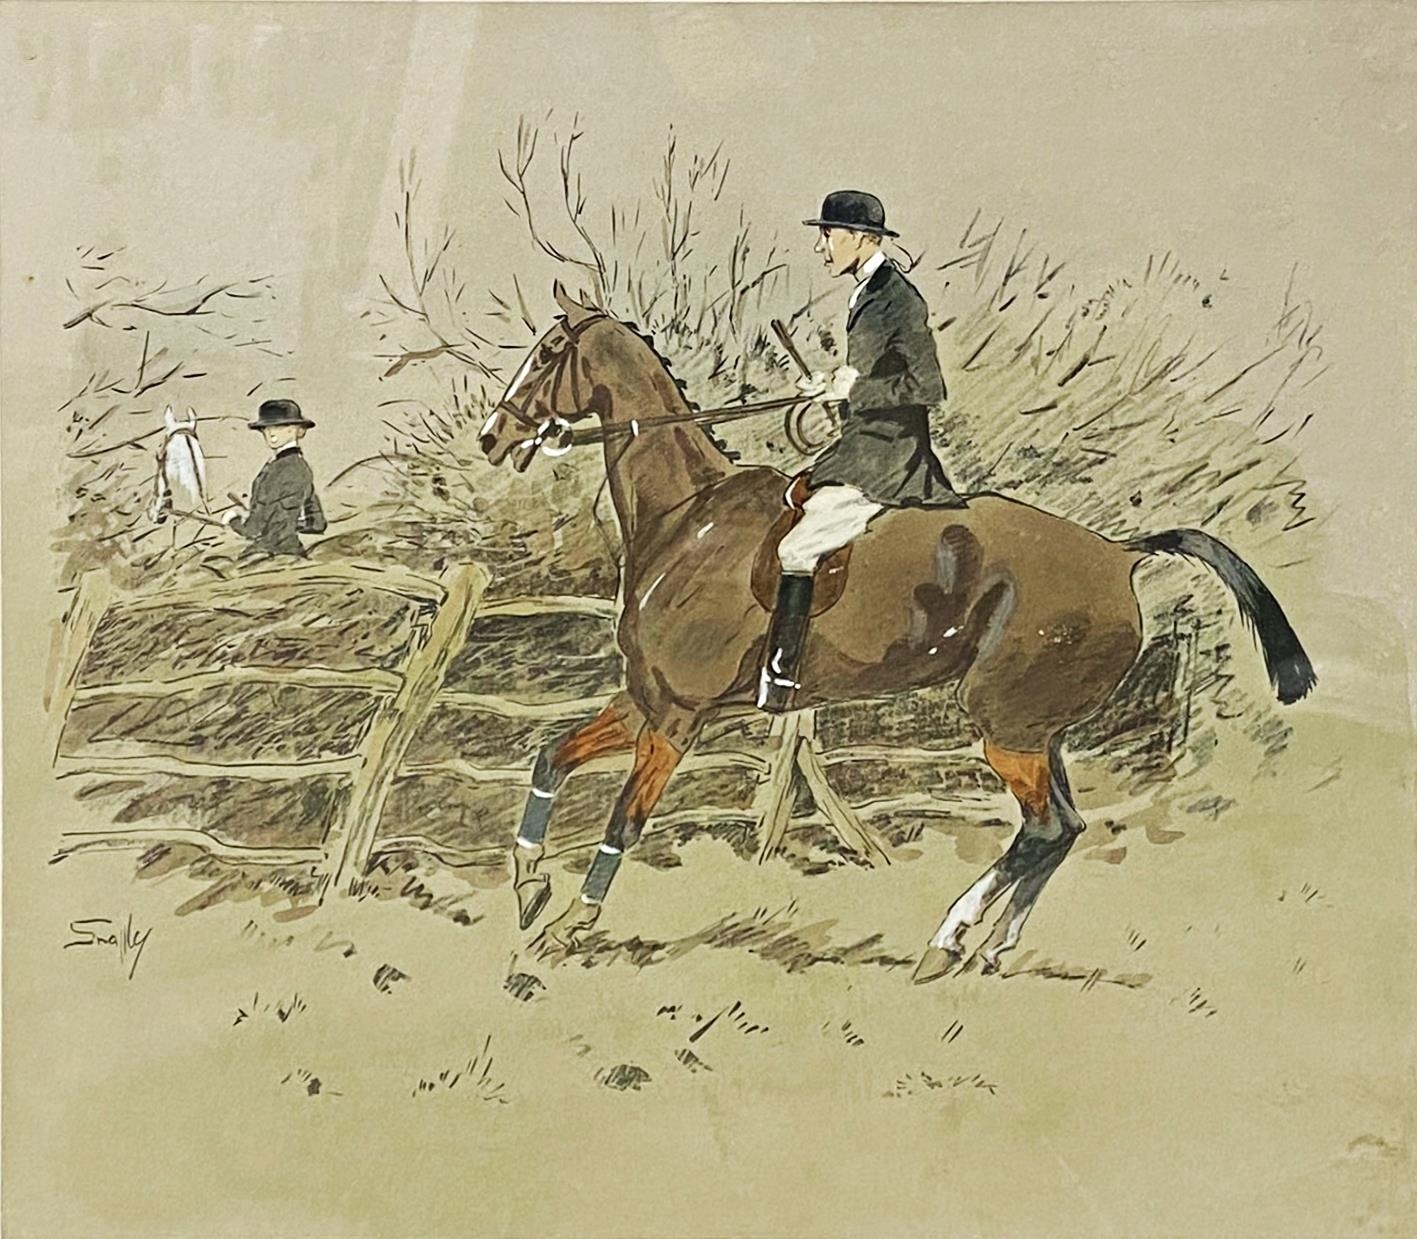 'Snaffles' (Charles Johnson Payne, 1884-1967) - 'Not Taking Any', print with hand coloured